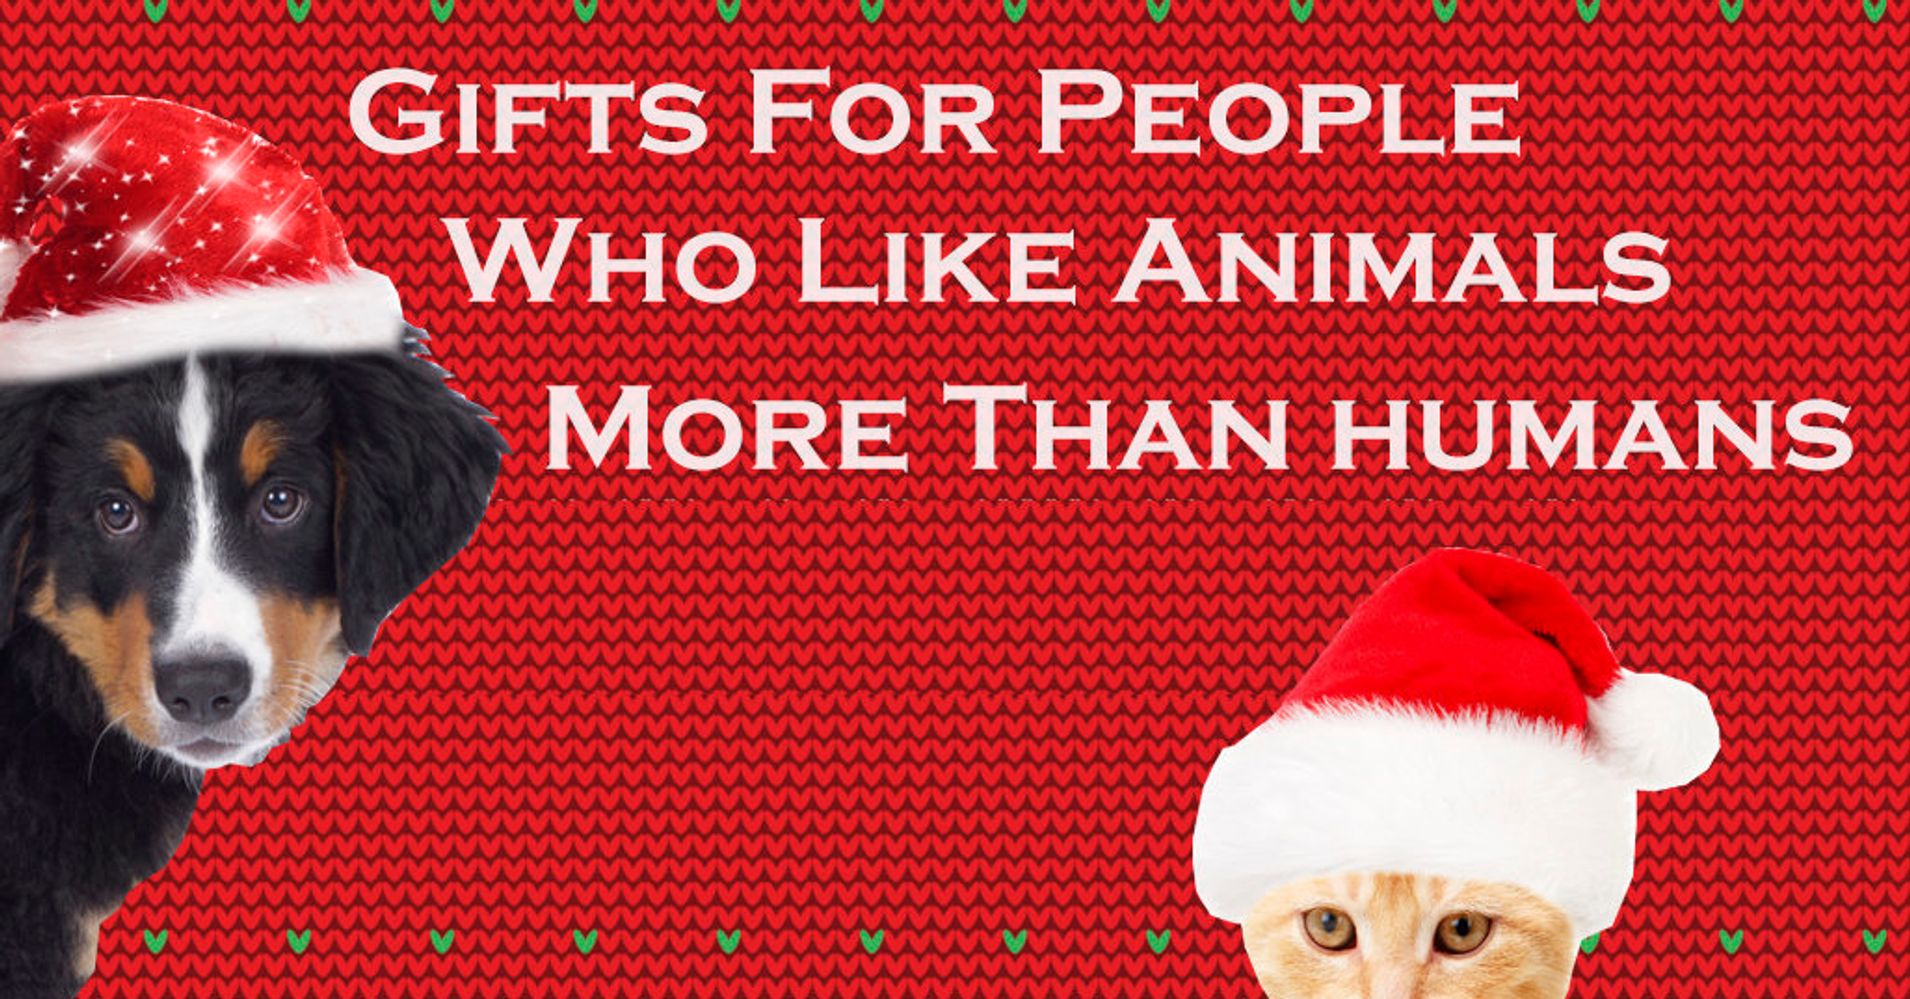 21 Gifts For People Who Like Cats And Dogs More Than Humans | HuffPost